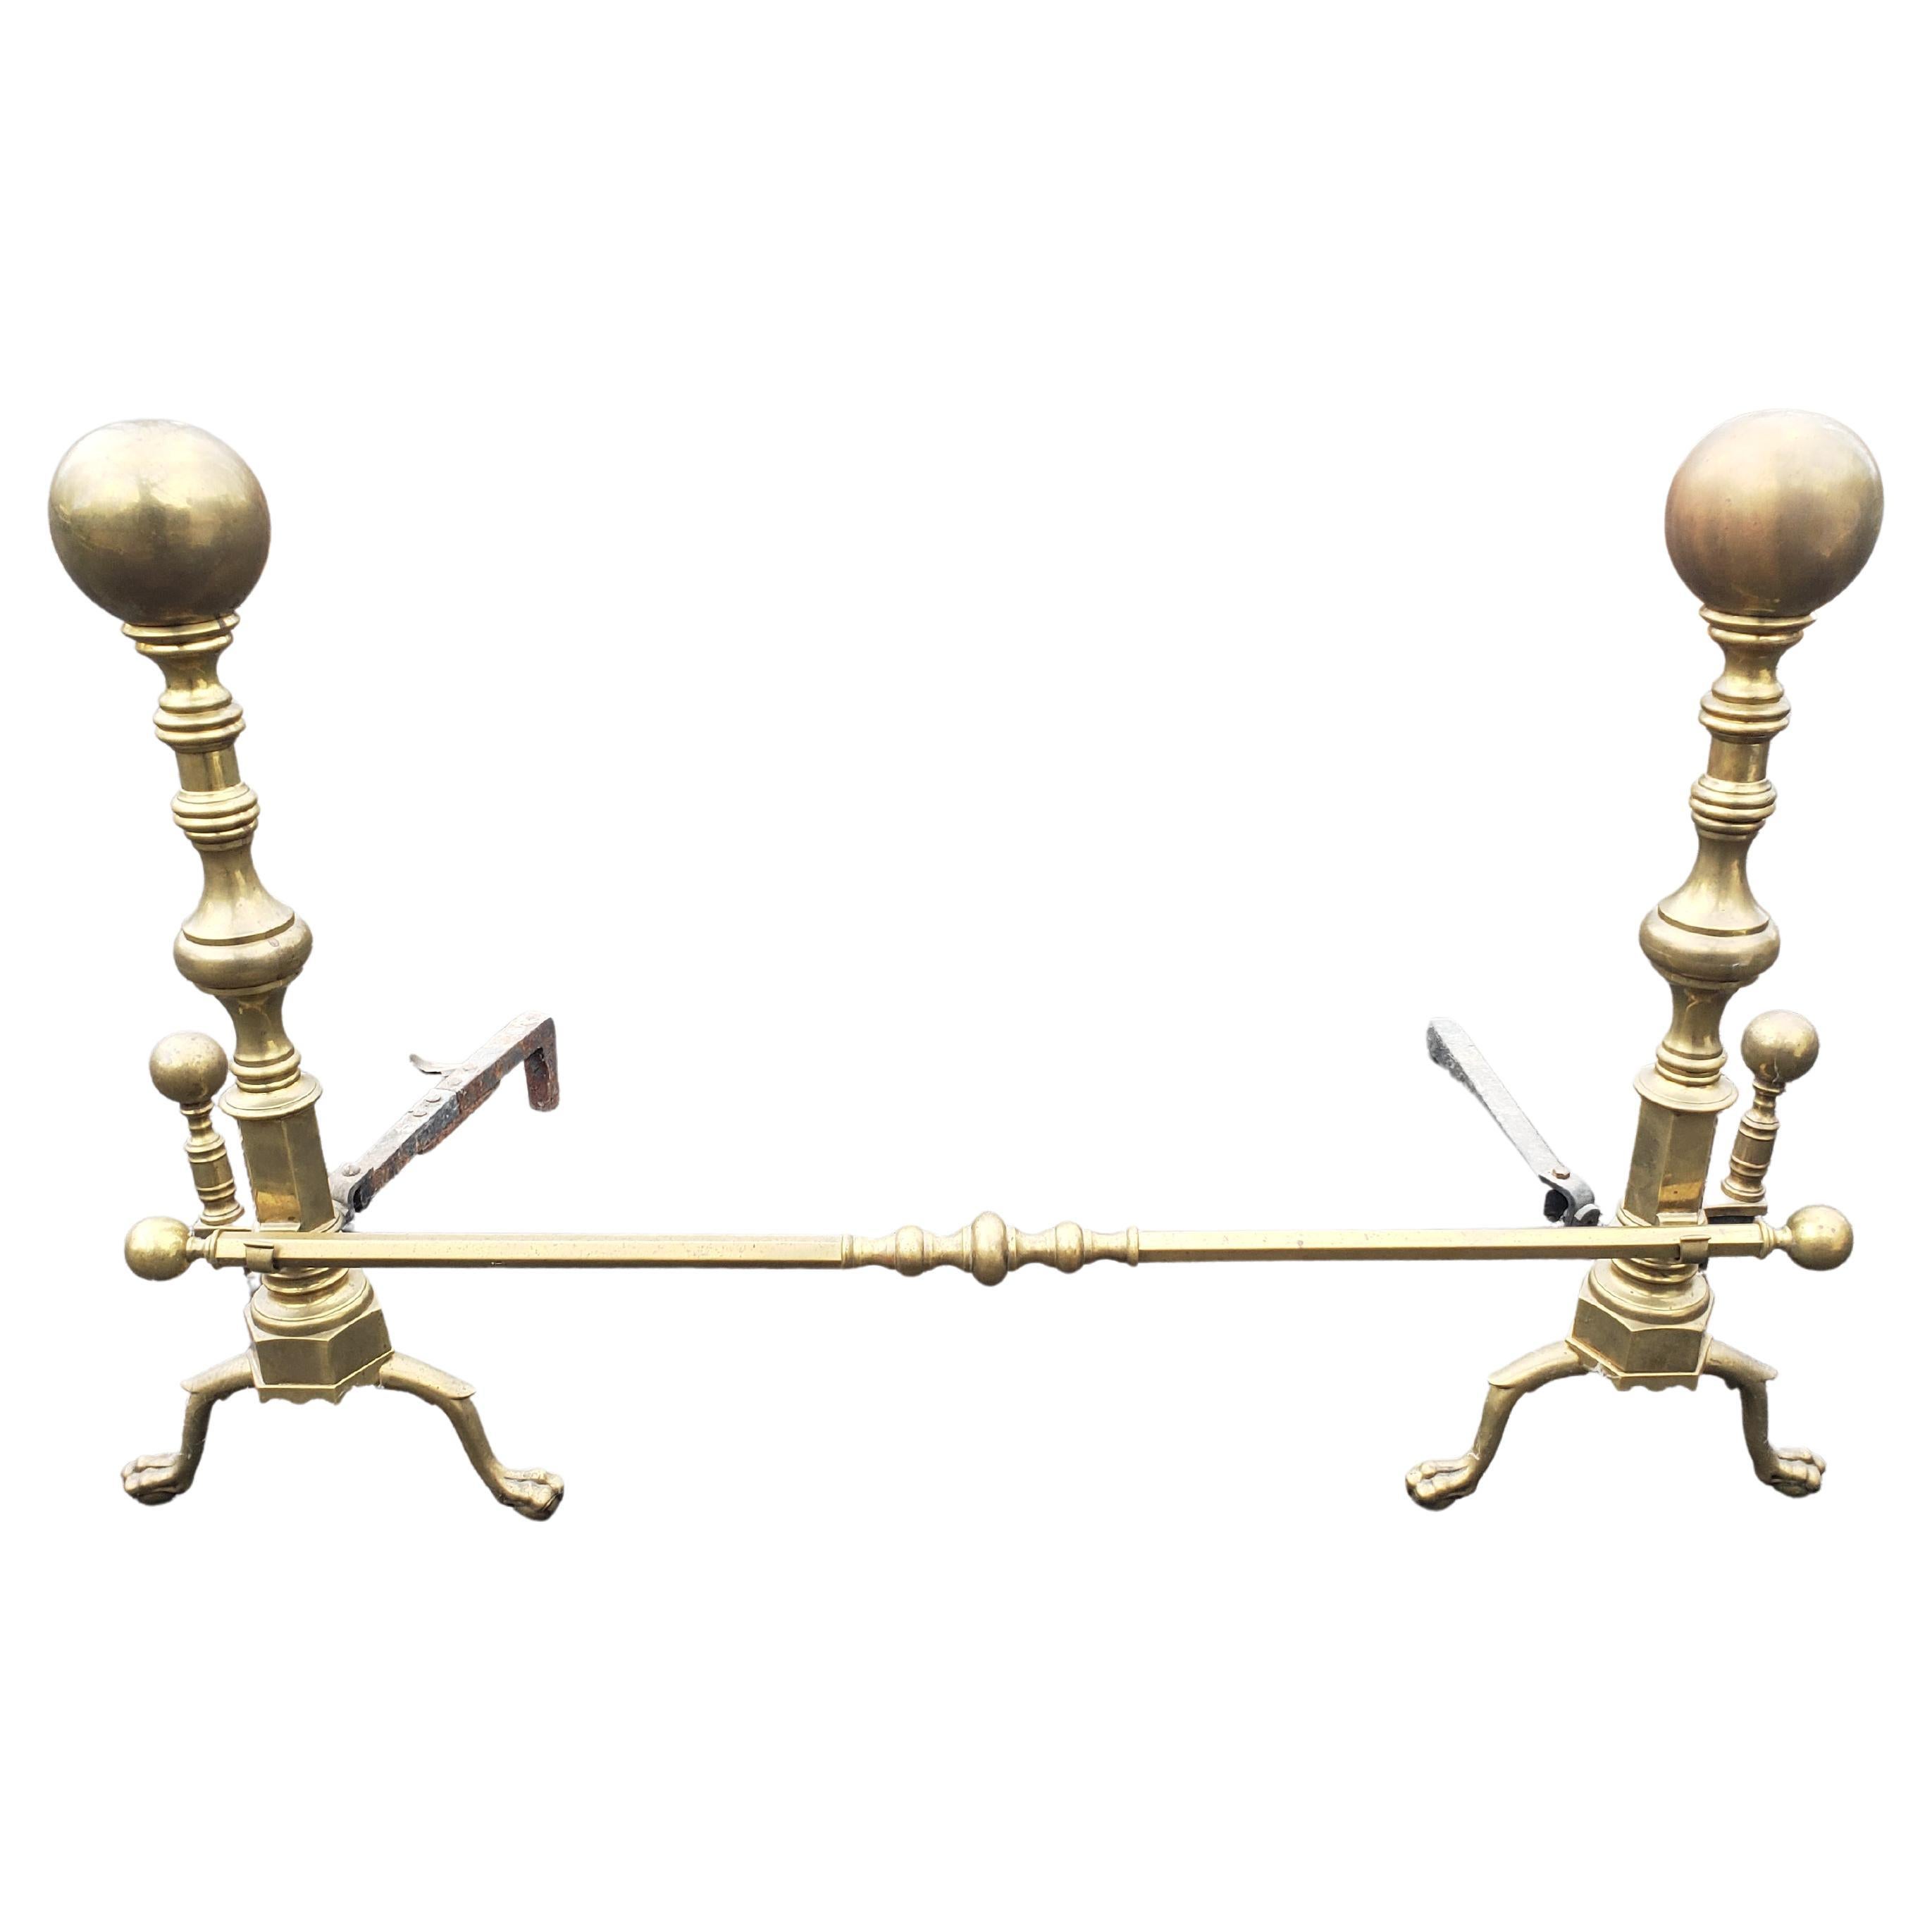 Vintage Solid Brass Andirons with Roll Bar, Circa 1920s For Sale 2